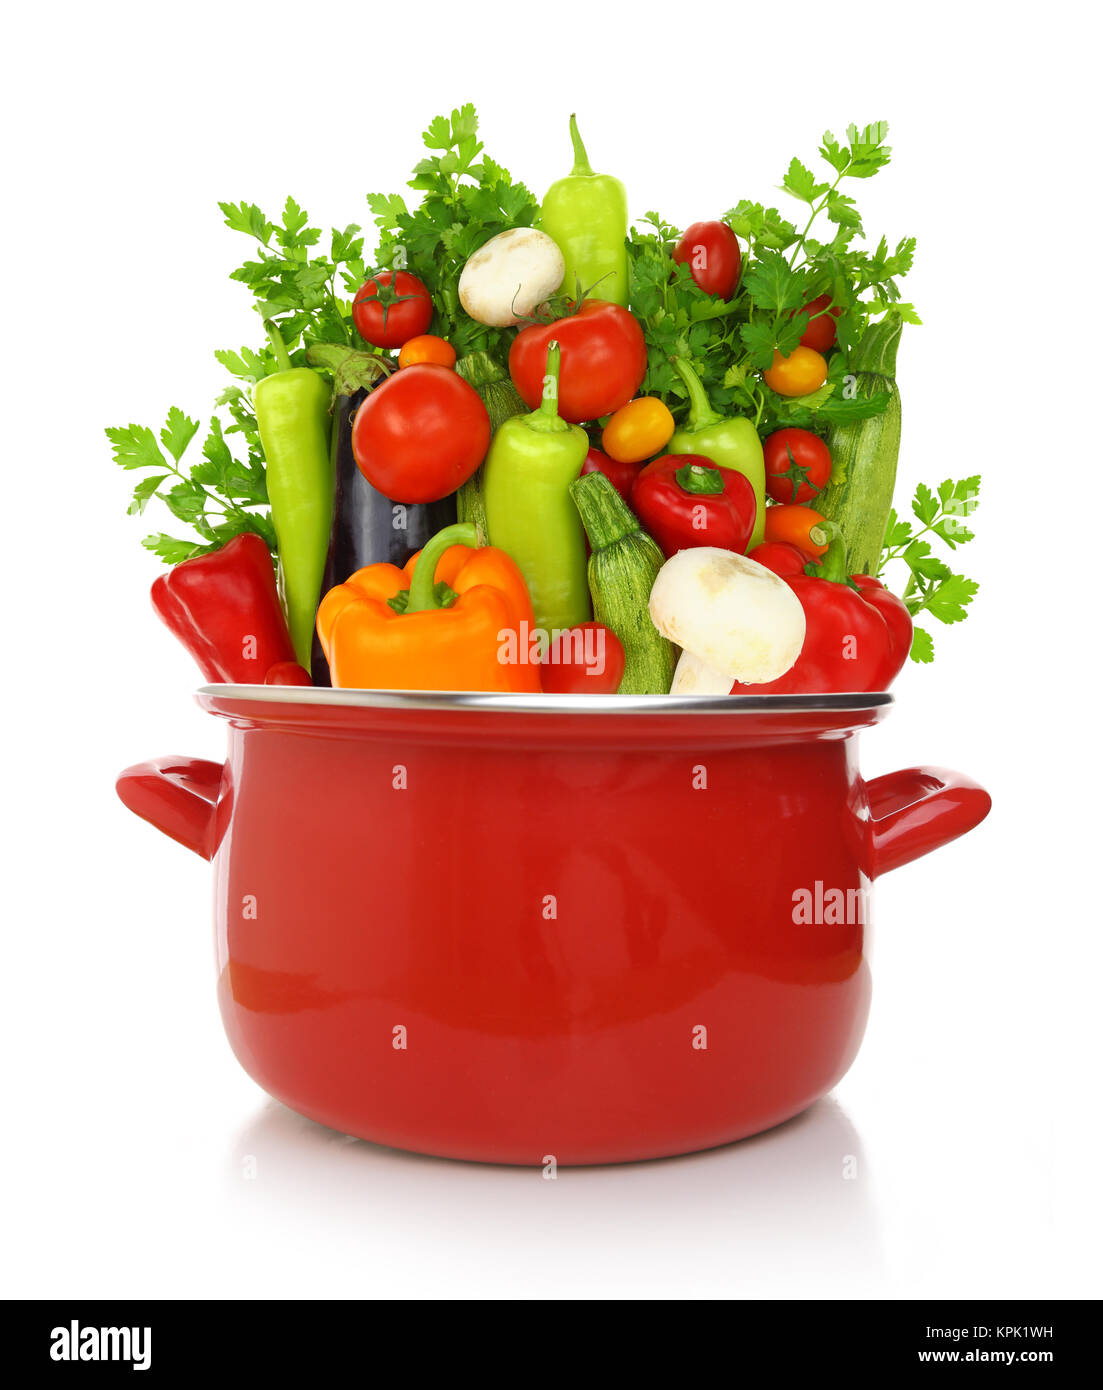 Colorful vegetables in a red cooking pot isolated on white background Stock Photo